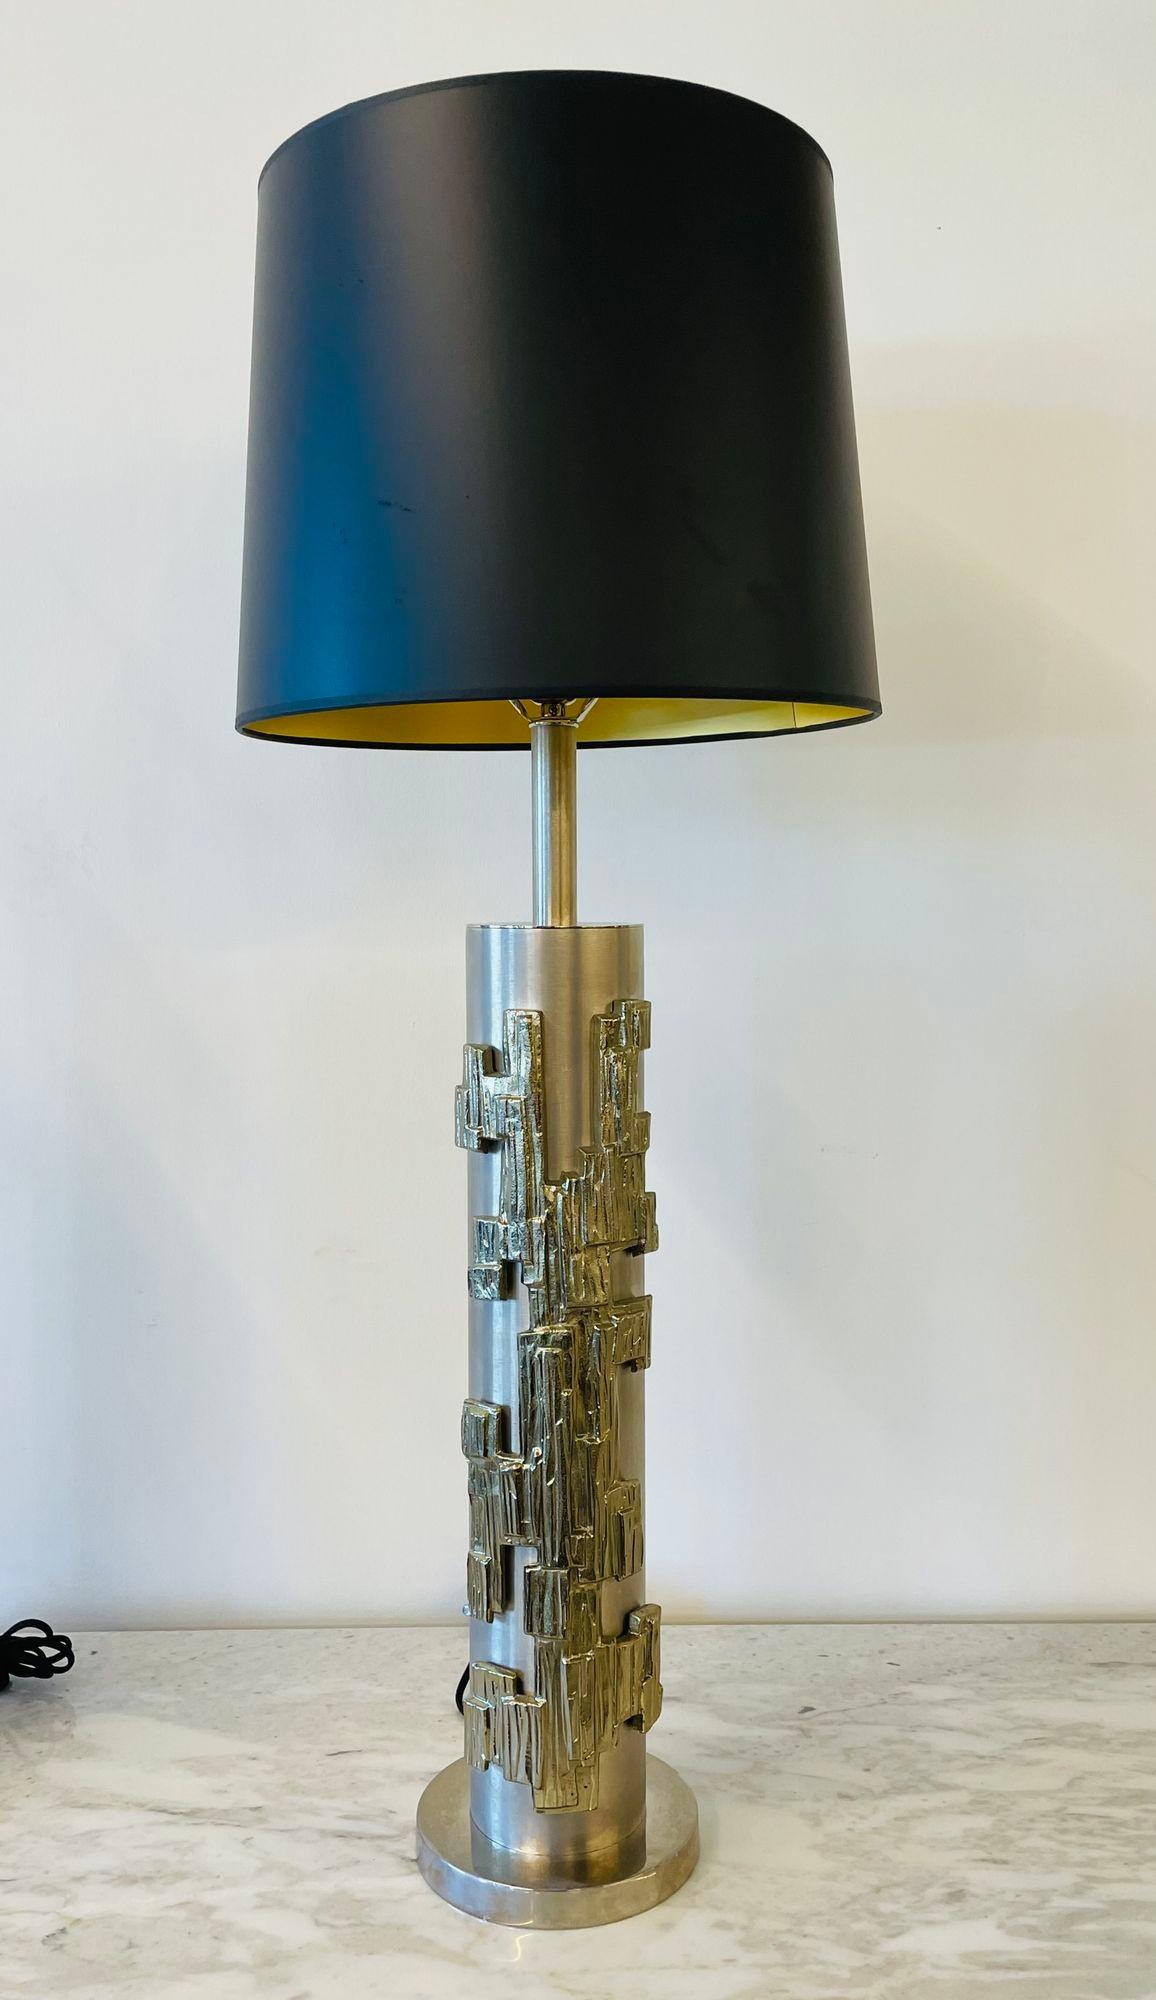 20th Century Pair of Modernist Table Lamps, Brushed Nickel and Sculptural Metal, 1970s For Sale